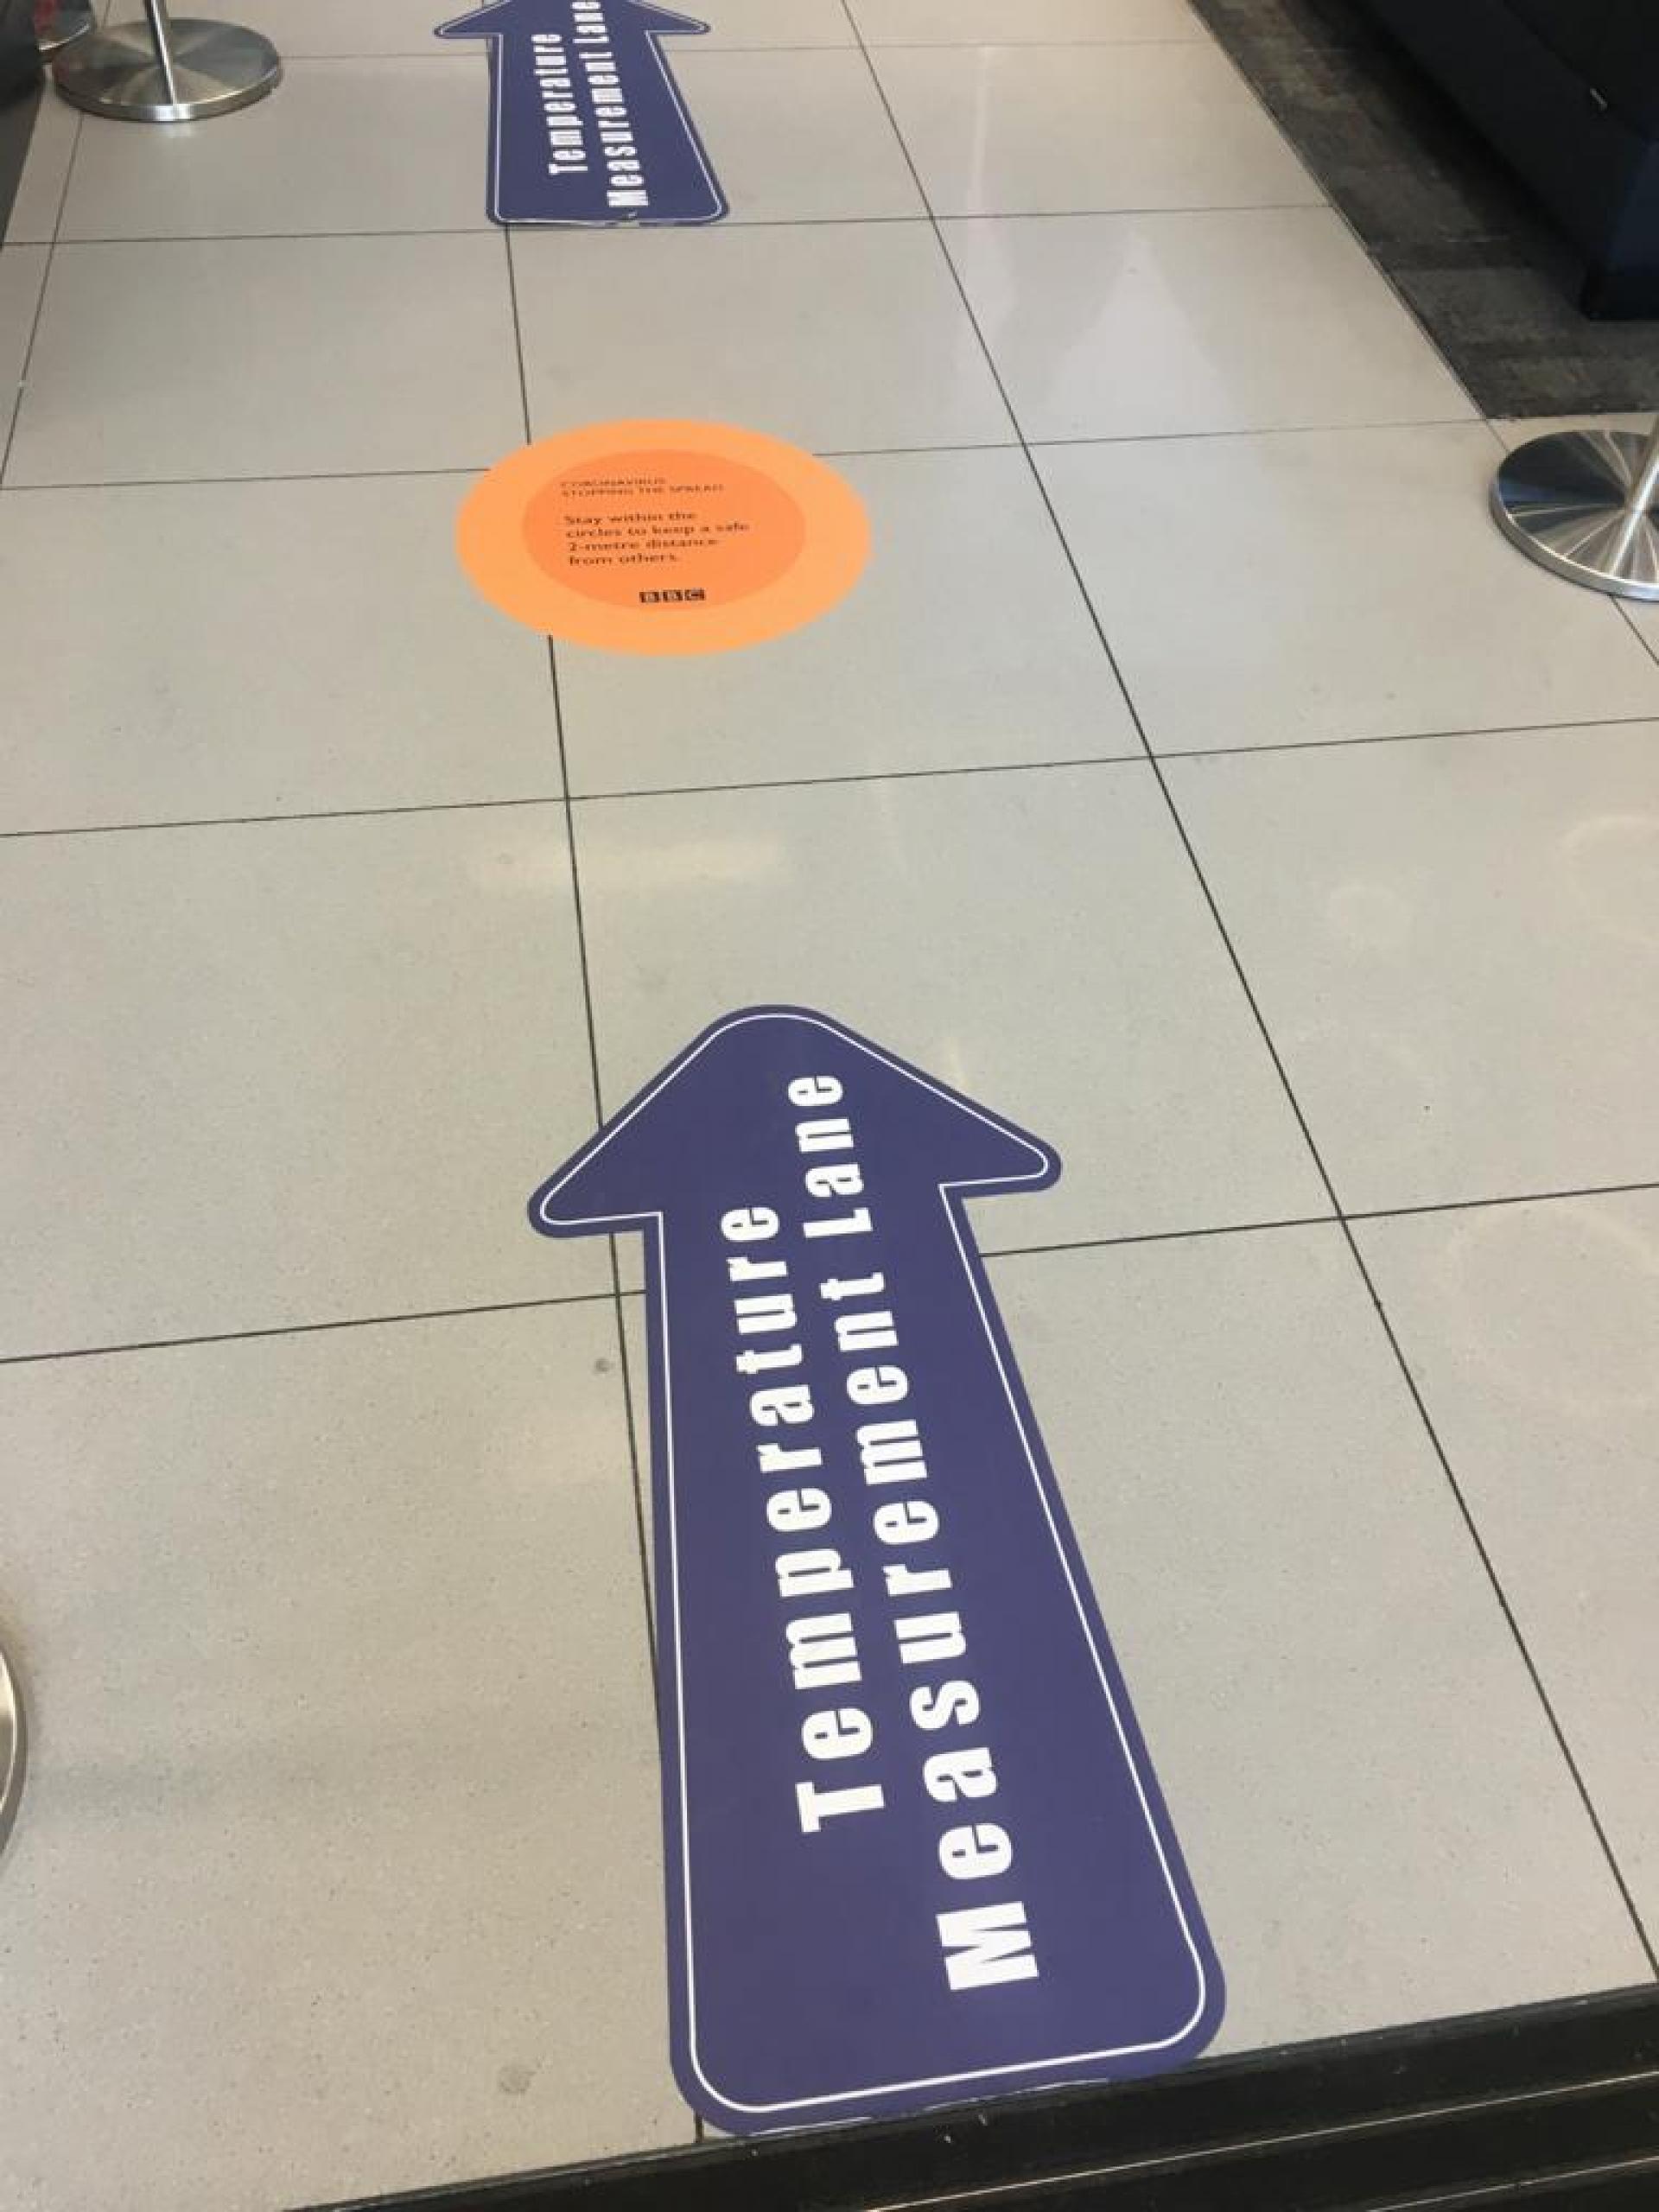 Signs on the floor at the BBC direct people to the thermal scanners. 